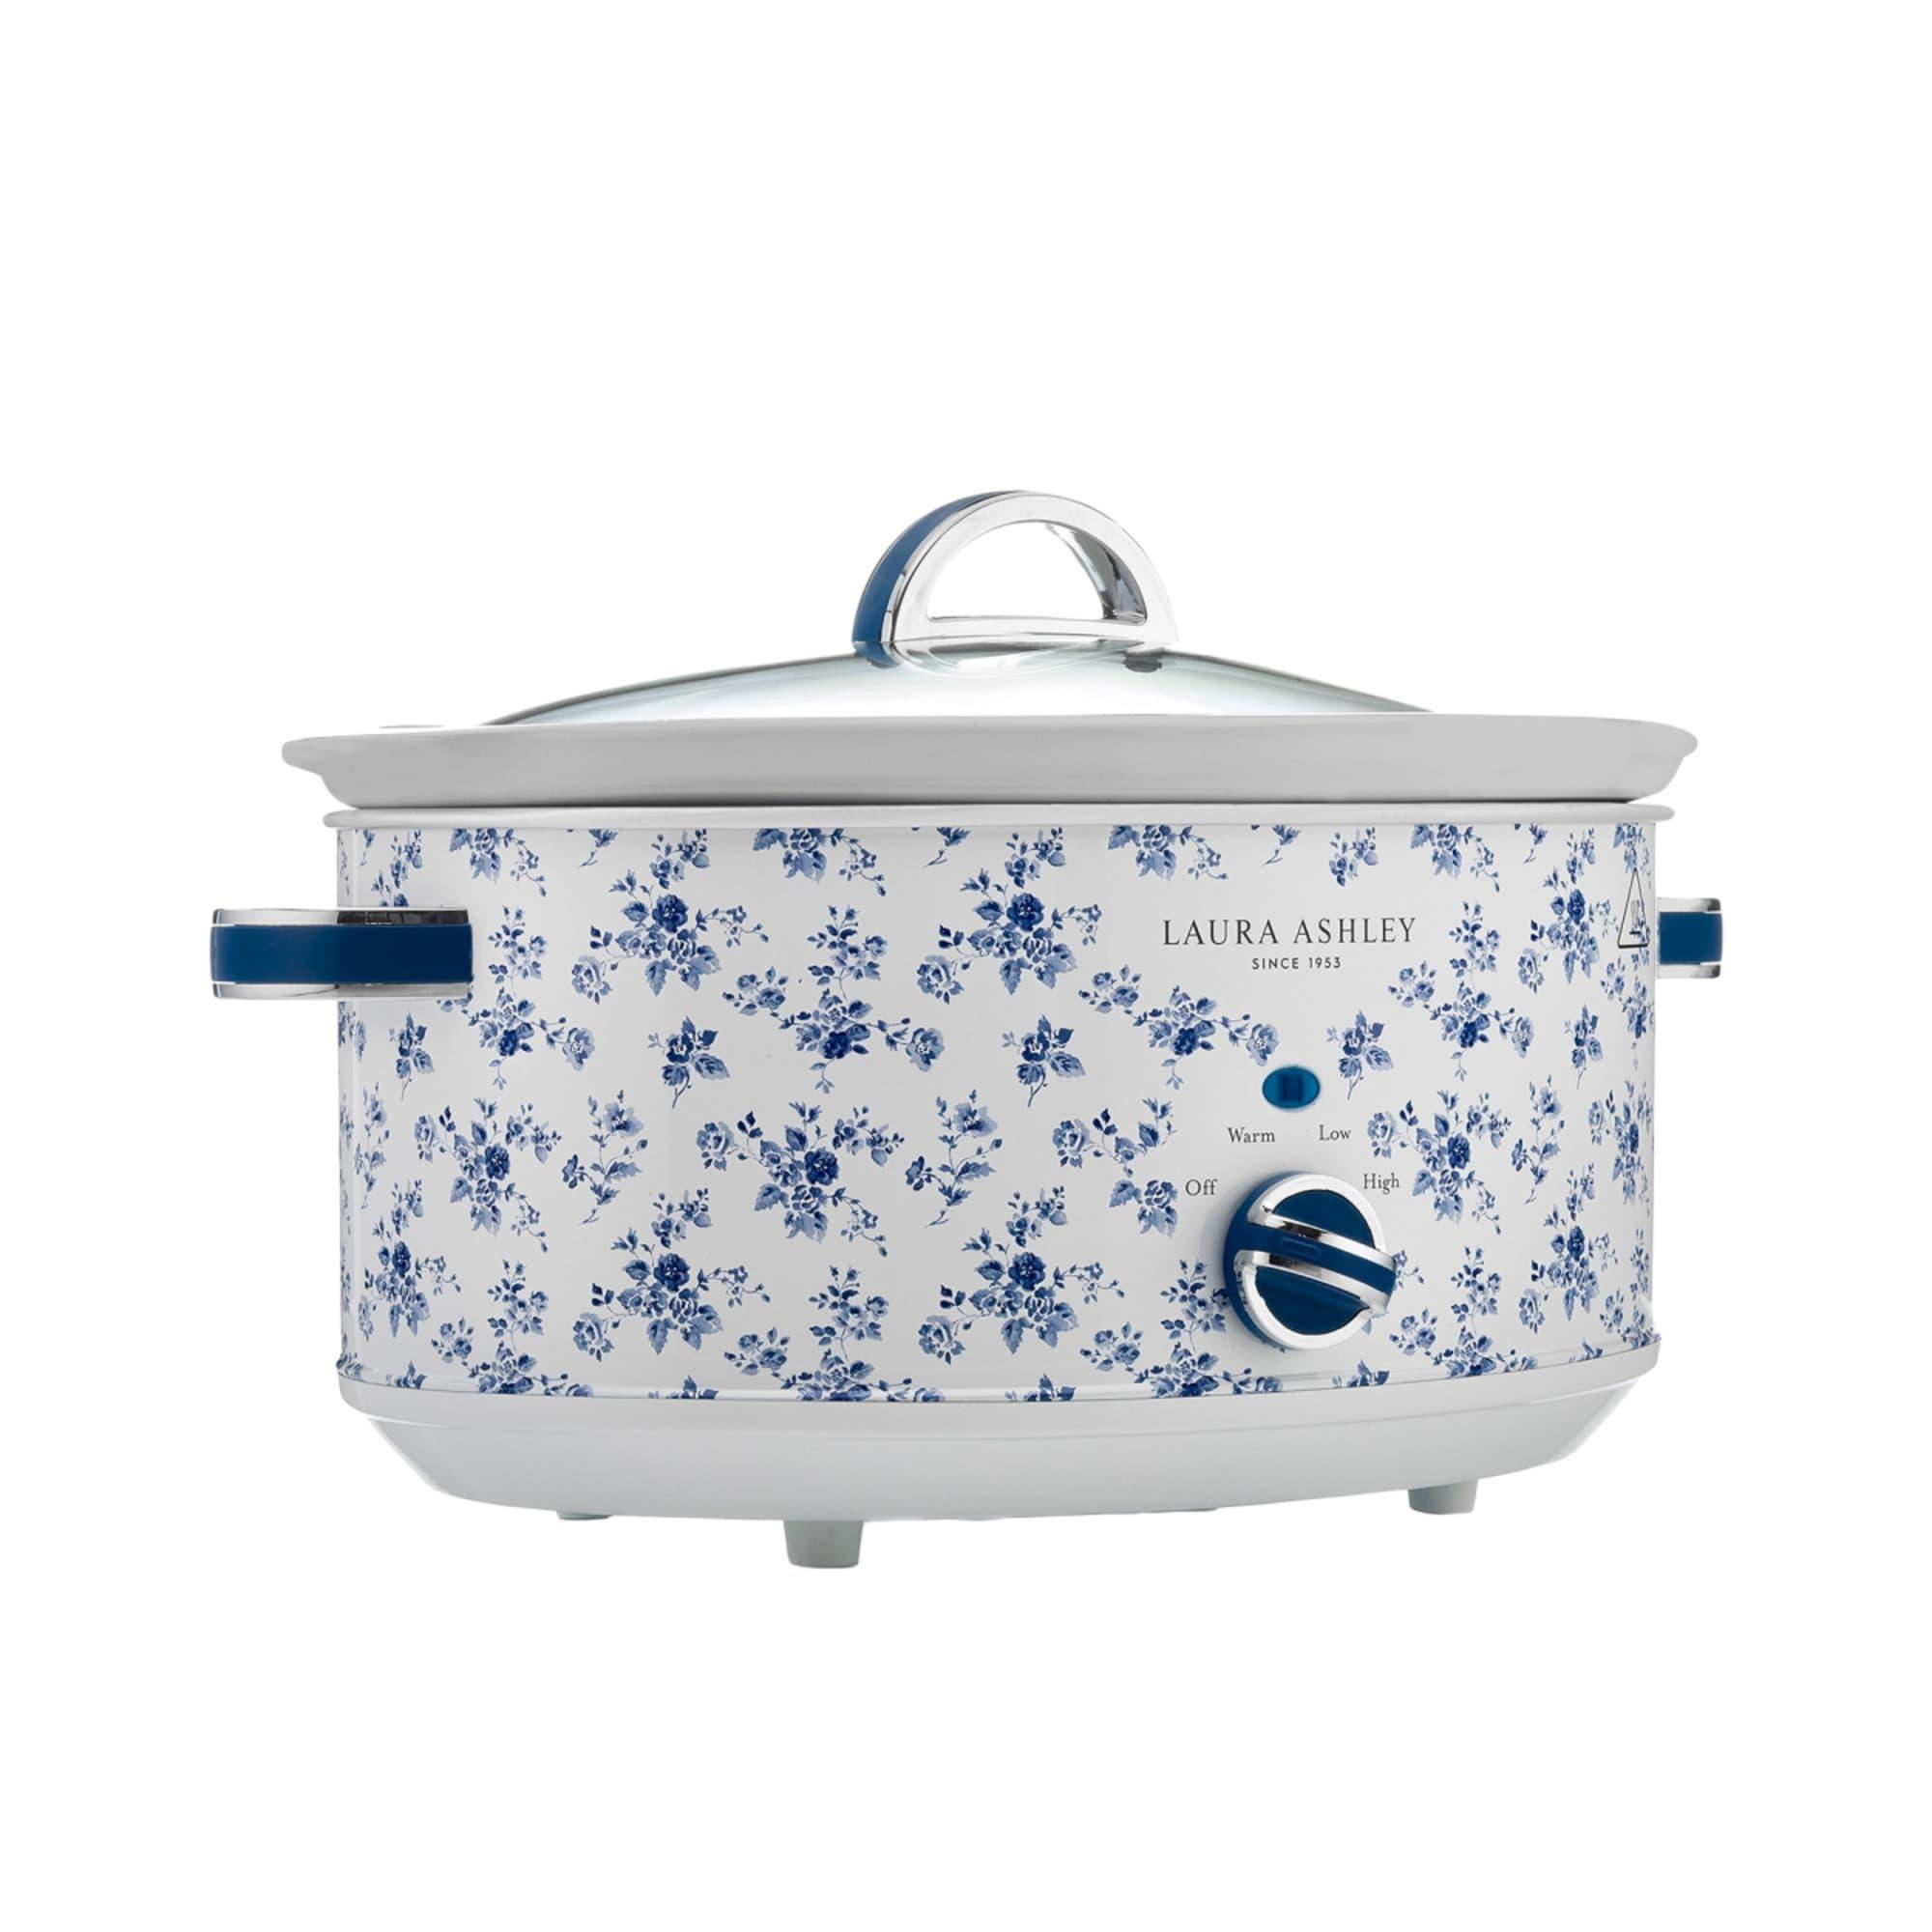 Laura Ashley China Rose Slow Cooker 6.5L White and Blue Image 5